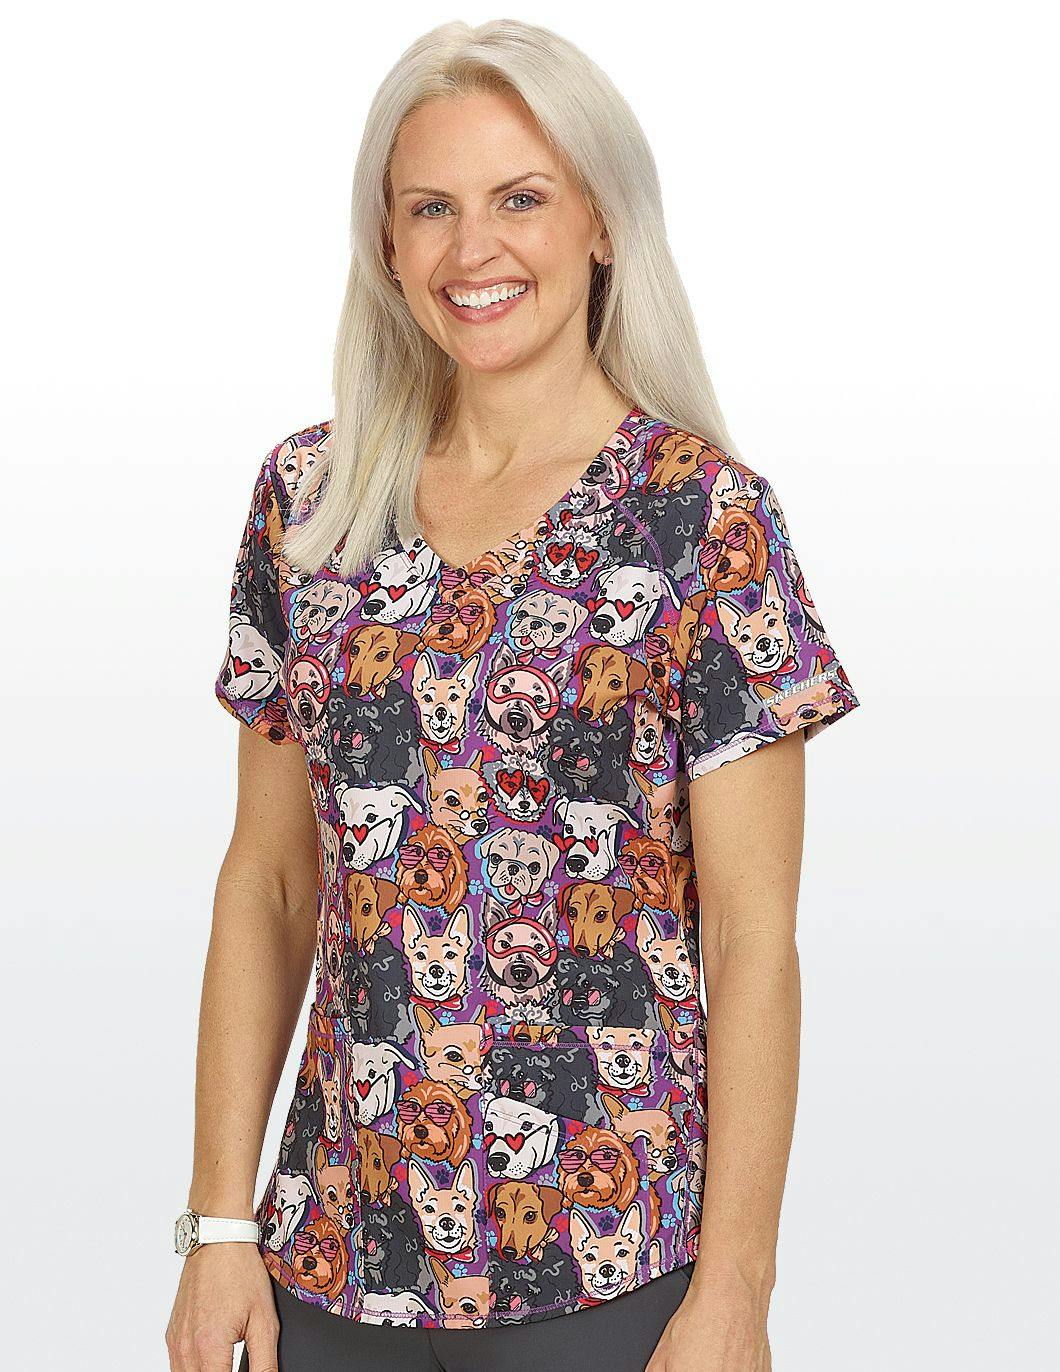 Skechers-Animal-Print-Scrub-Top-Part-of-the-Family